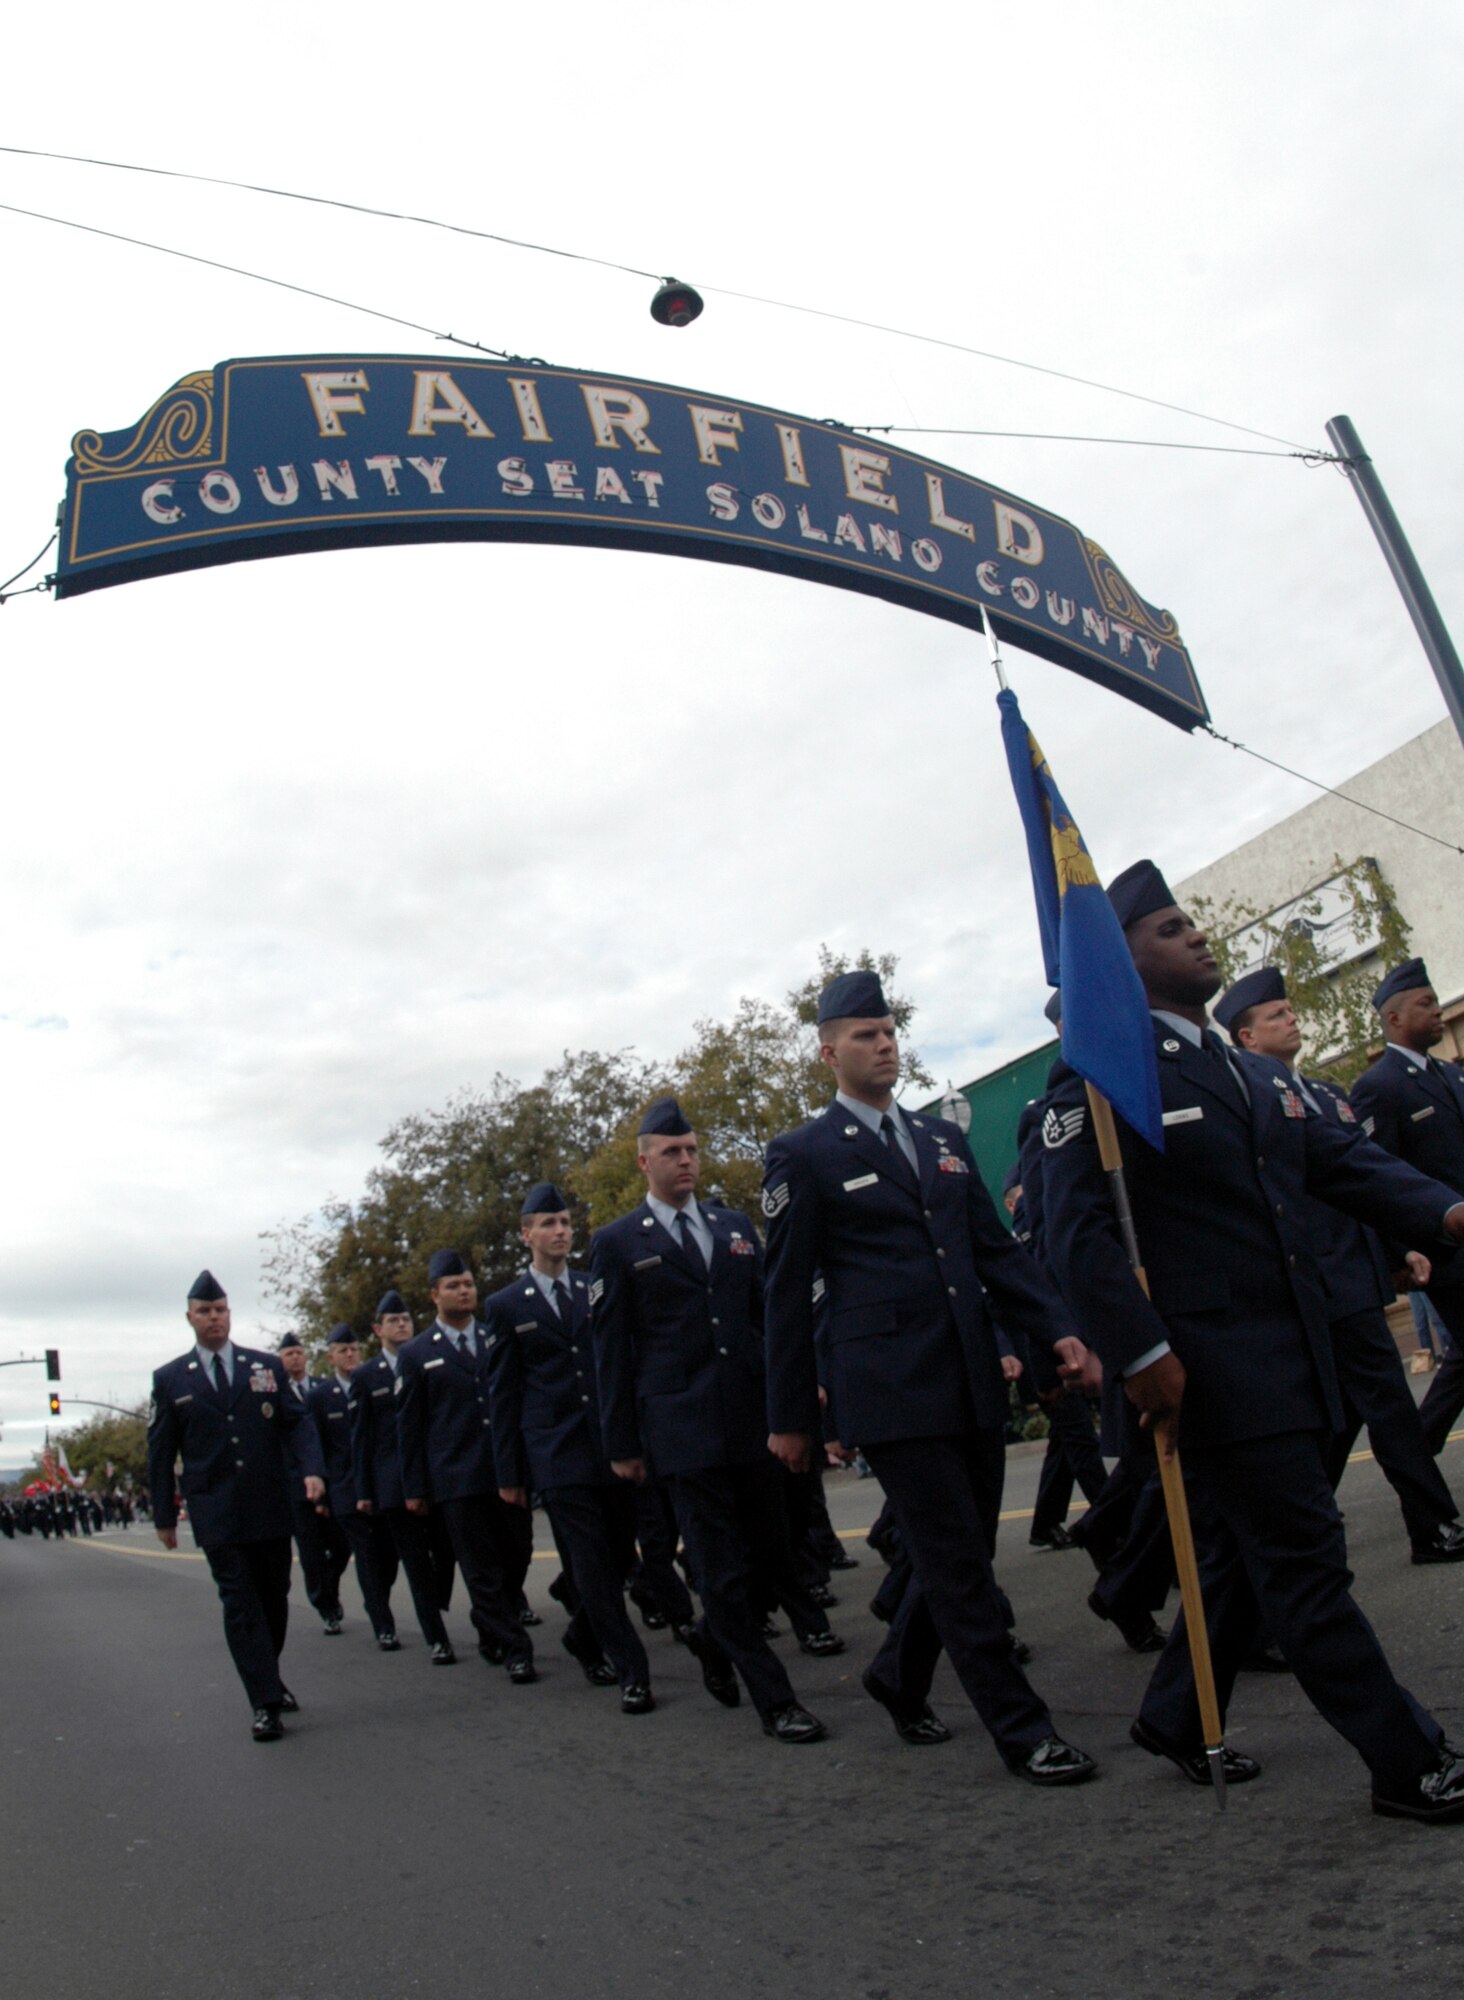 A flight of Airmen from the 60th Air Mobility Wing take part in the Fairfied Veterans Day Parade in Fairfield, Calif. Nov. 11. (U.S. Air Force photo/Staff Sgt. Shaun Emery)